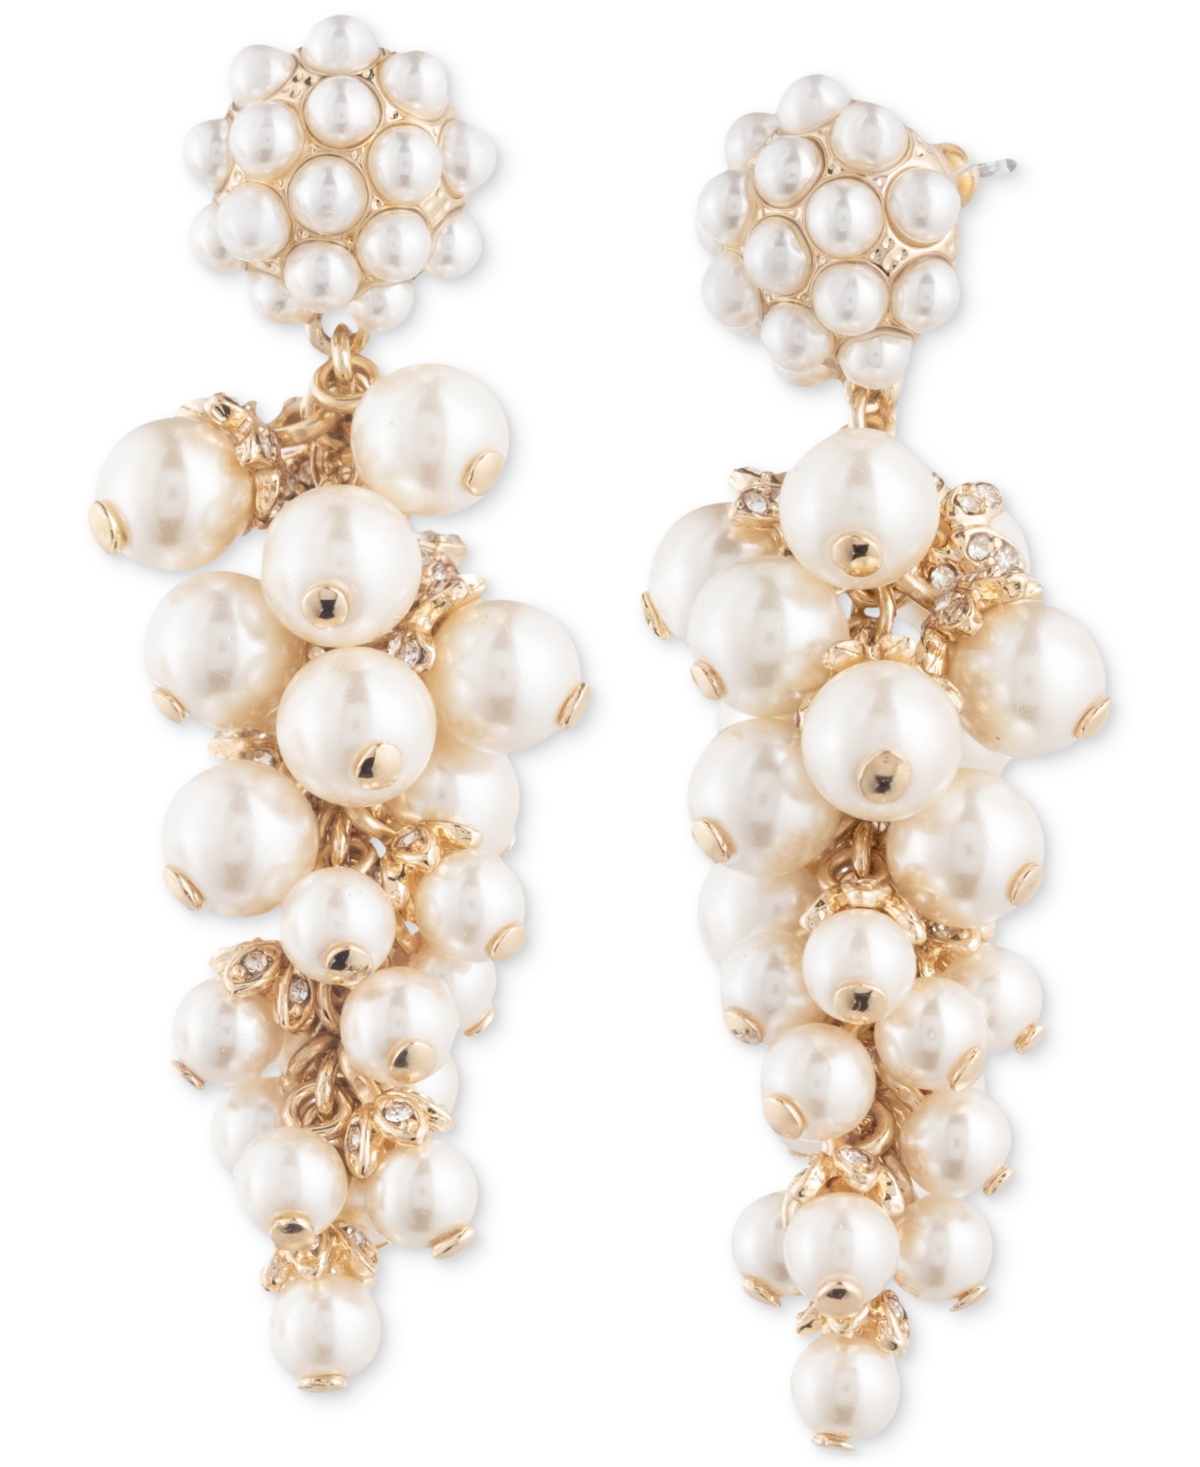 MARCHESA GOLD-TONE IMITATION PEARL LARGE CLUSTER LINEAR DROP EARRINGS